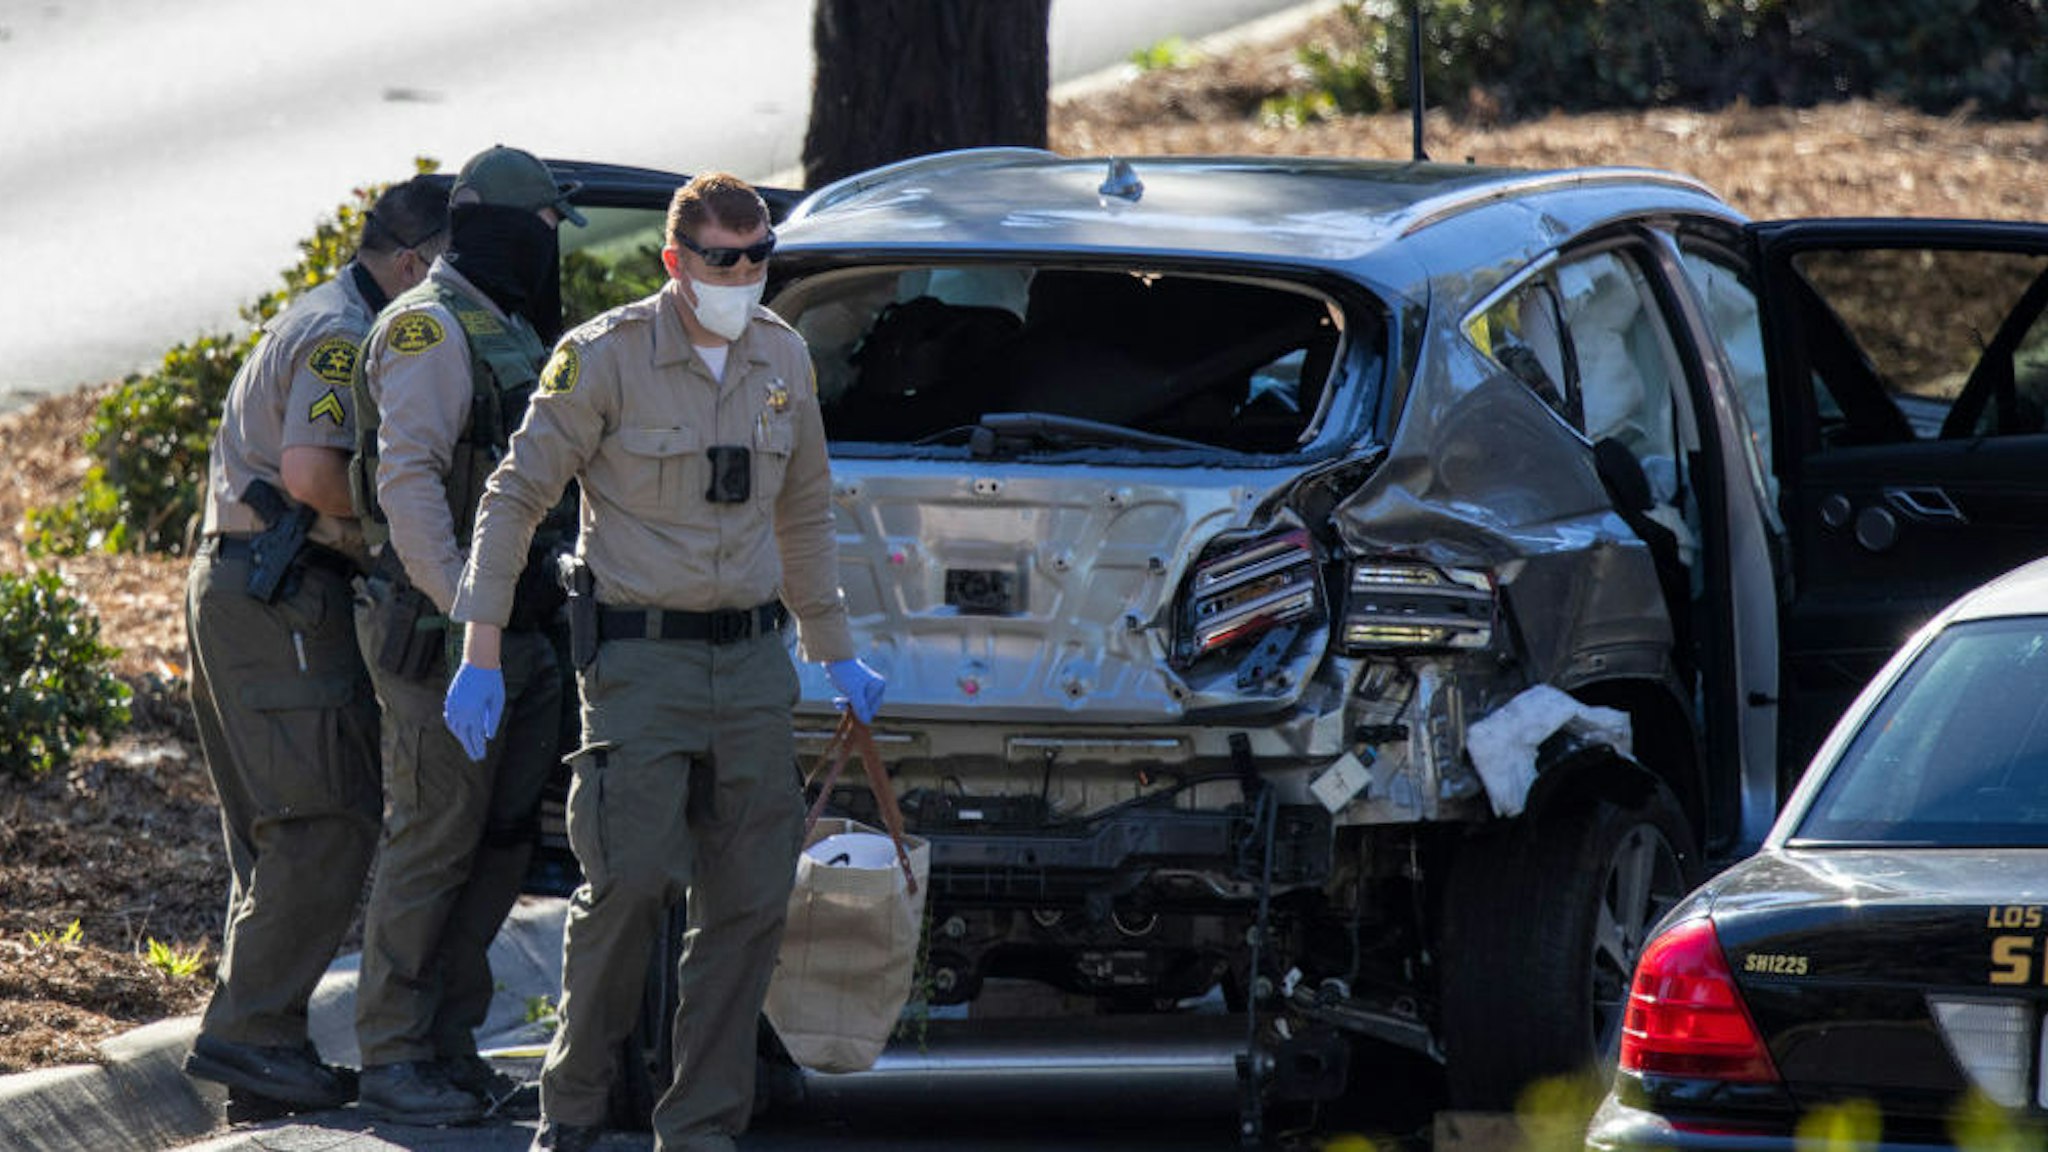 ROLLING HILLS ESTATES, CA - FEBRUARY 23: Los Angeles County Sheriff deputies gather evidence from the car that golf legend Tiger Woods was driving when seriously injured in a rollover accident on February 23, 2021 in Rolling Hills Estates, California. Rescuers used hydraulic rescue tools to extricate him from the car where he reportedly sustained major leg injuries. Law enforcement reports that there was no evidence of impairment. He was in town to participate in The Genesis Invitational golf tournament.